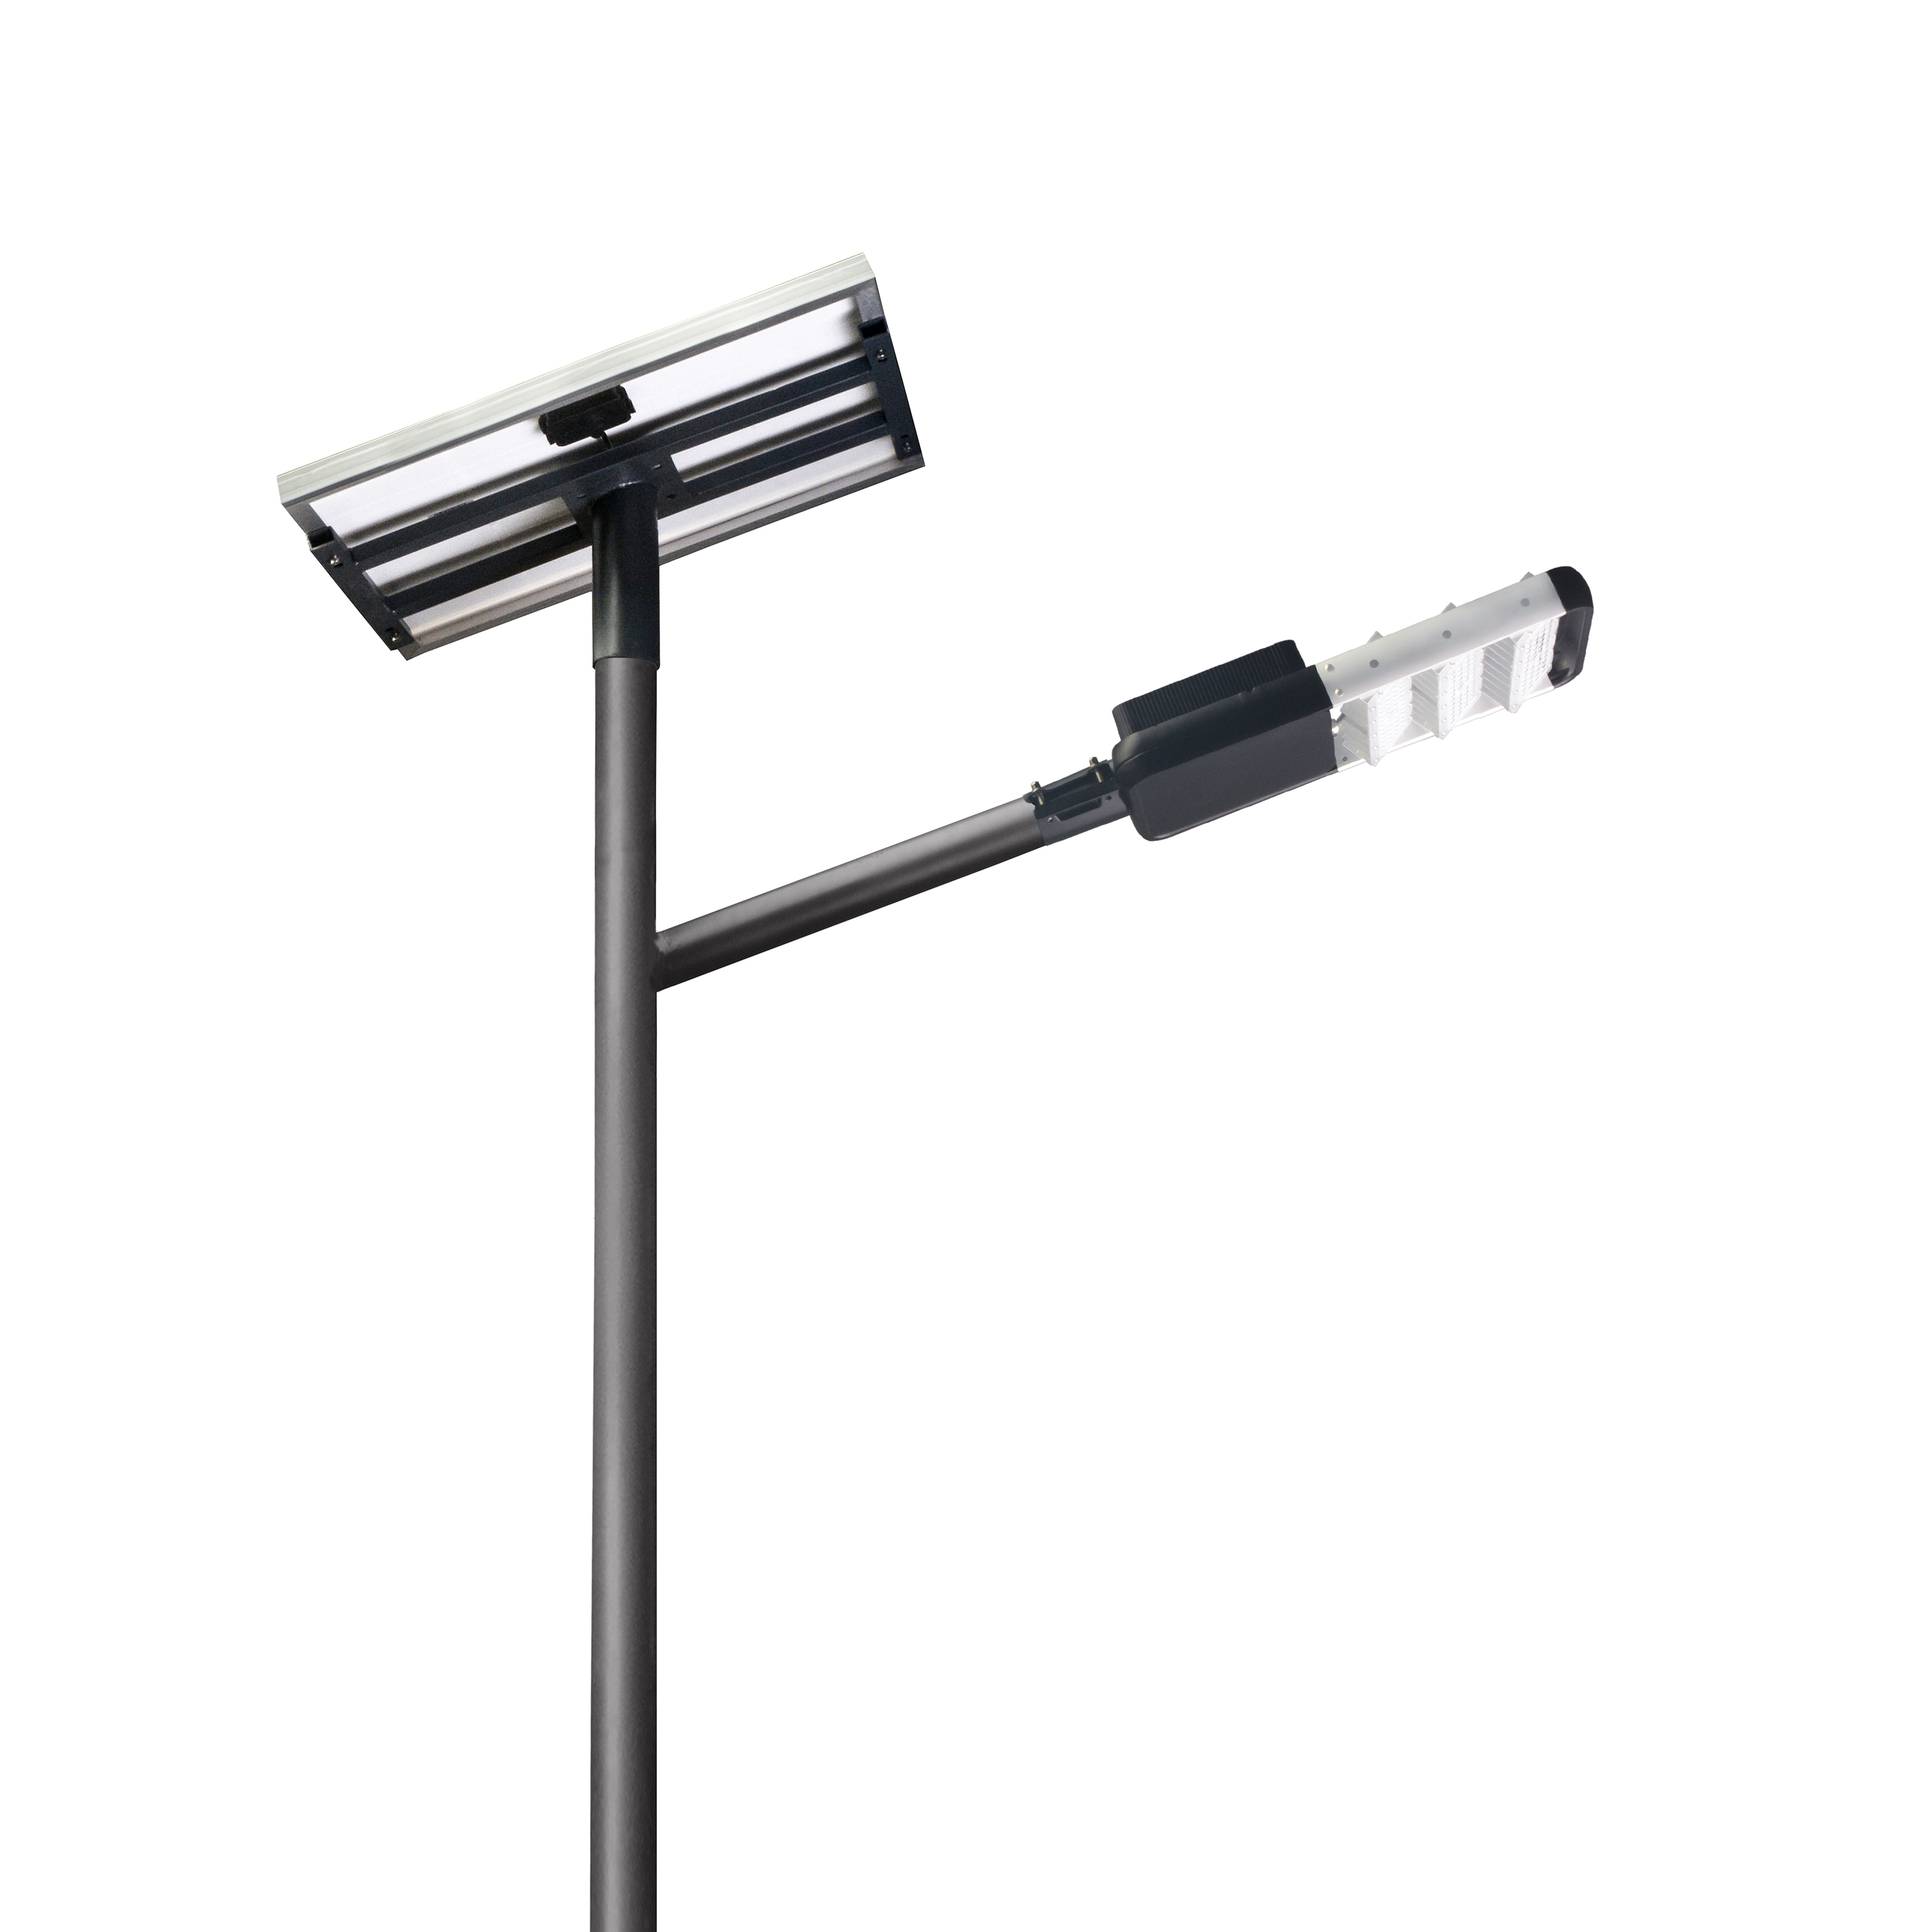 50W New Generation Integrated All in One Solar Street LED Street Light with IEC/TUV/RoHS/CE Certificate with Remote Control